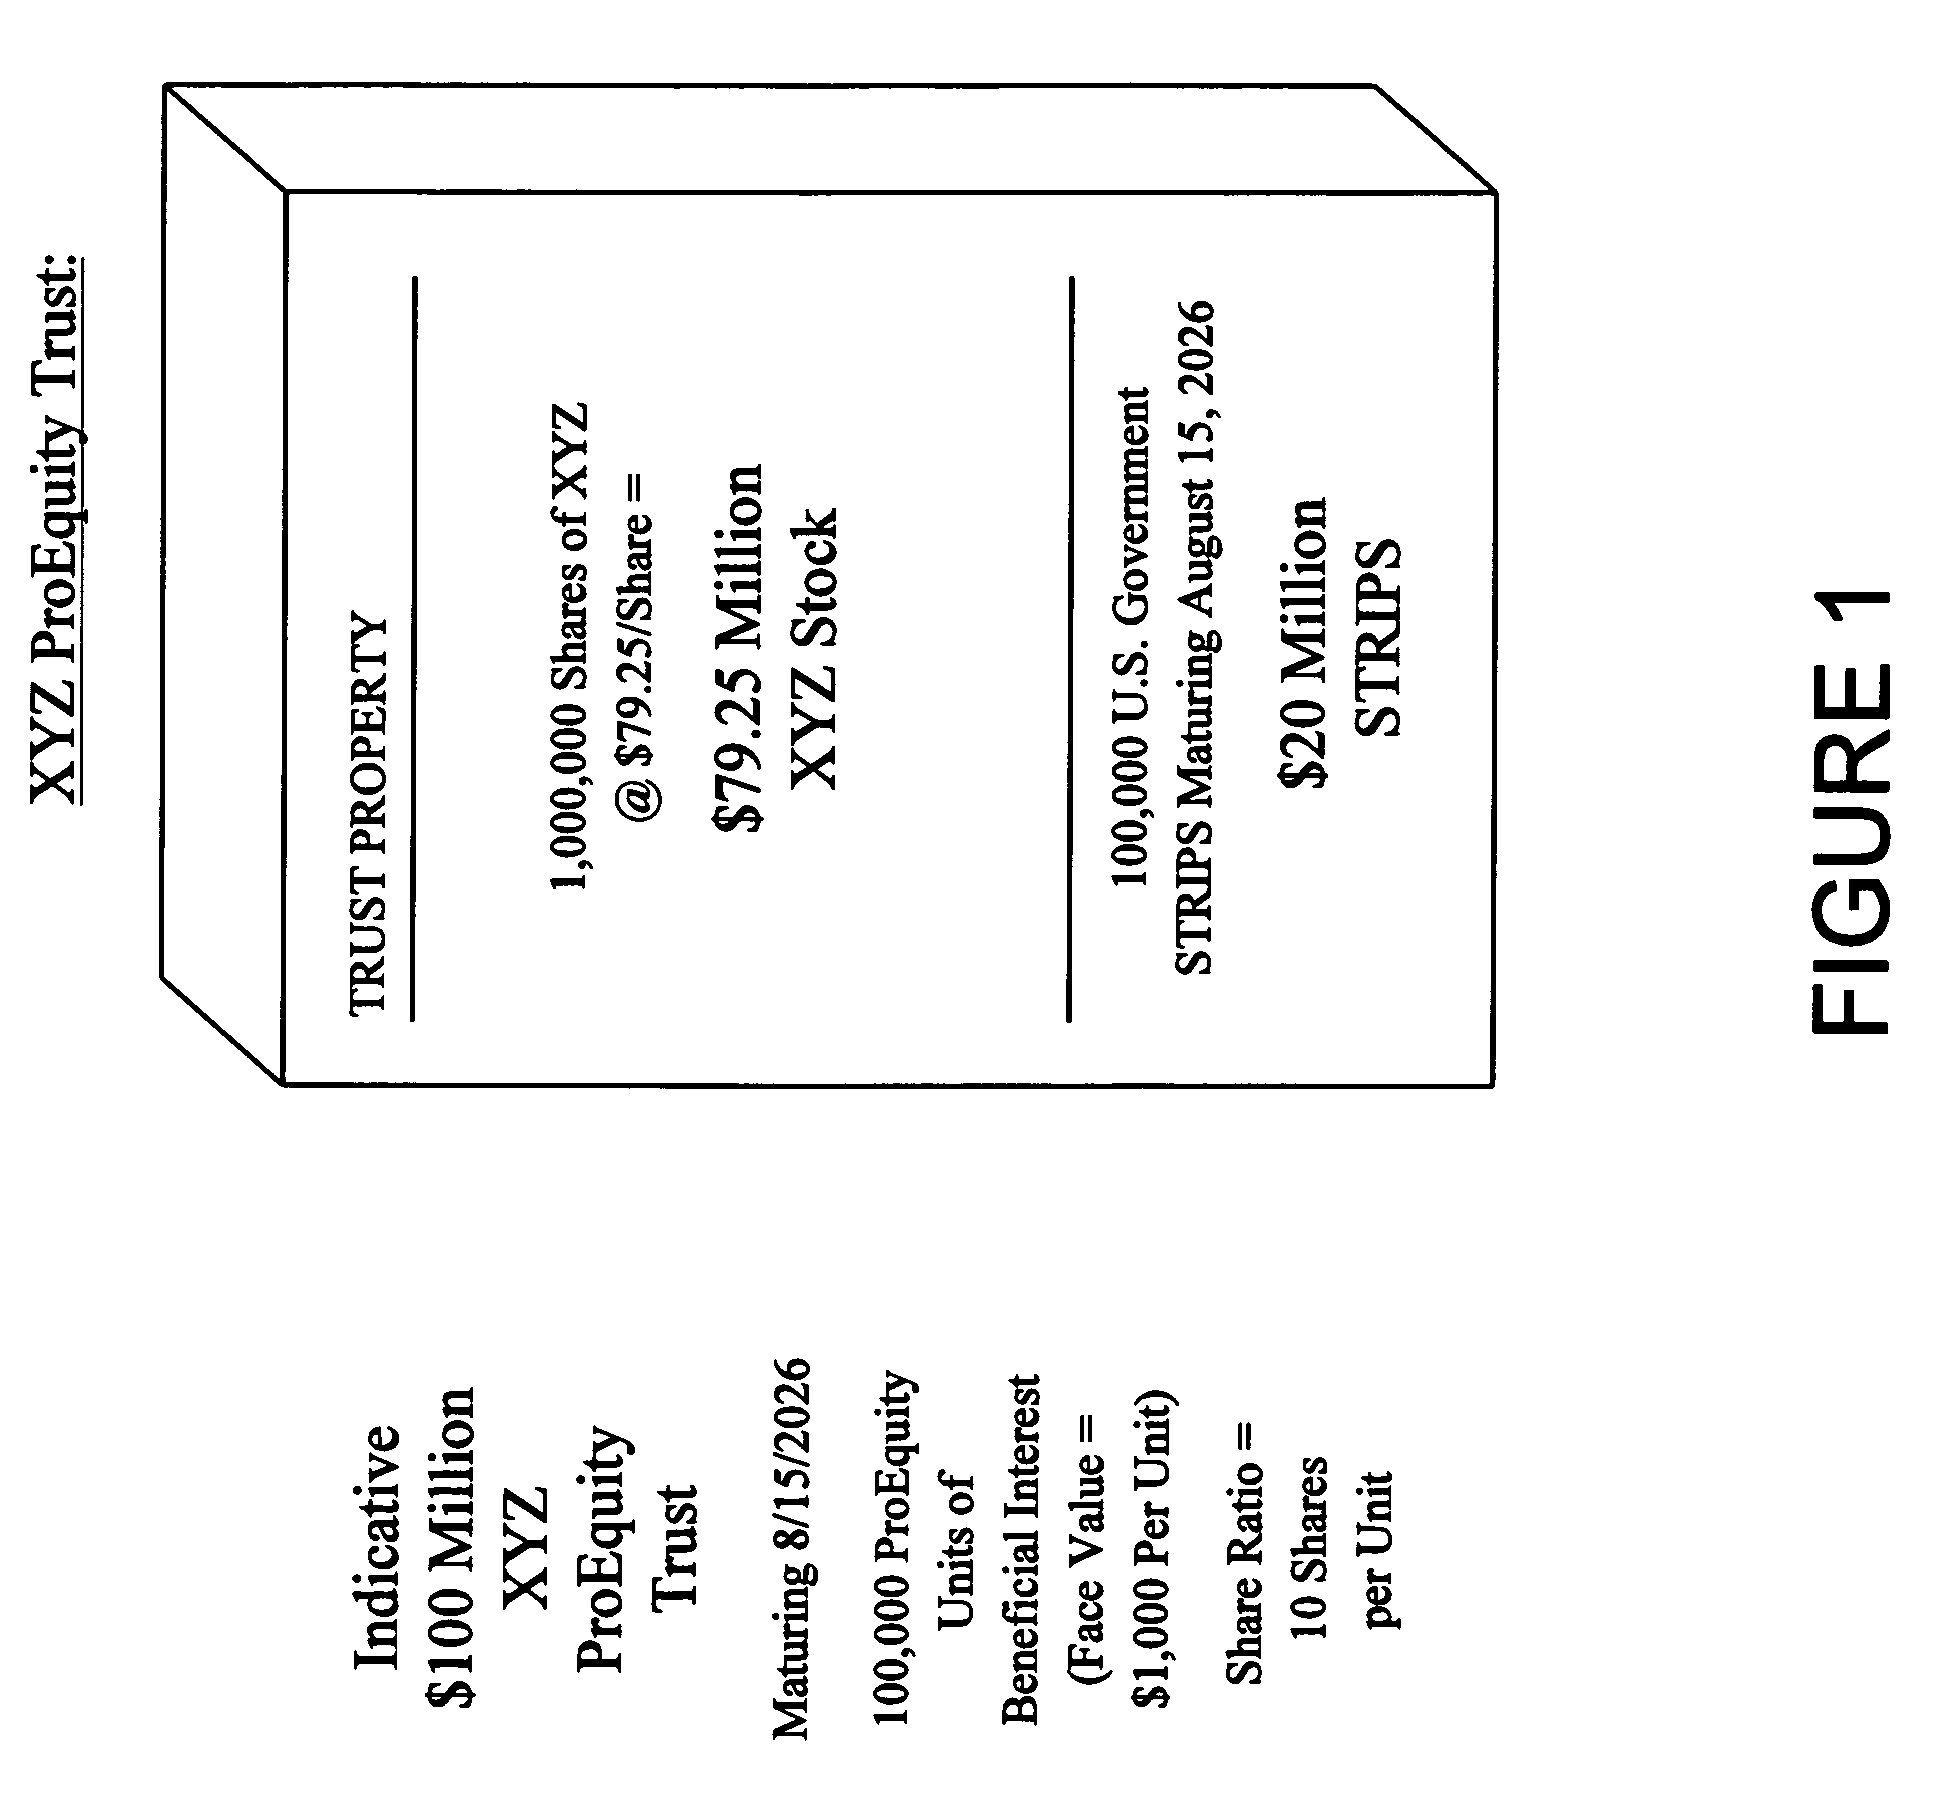 System and method for administering principal protected equity linked financial instruments